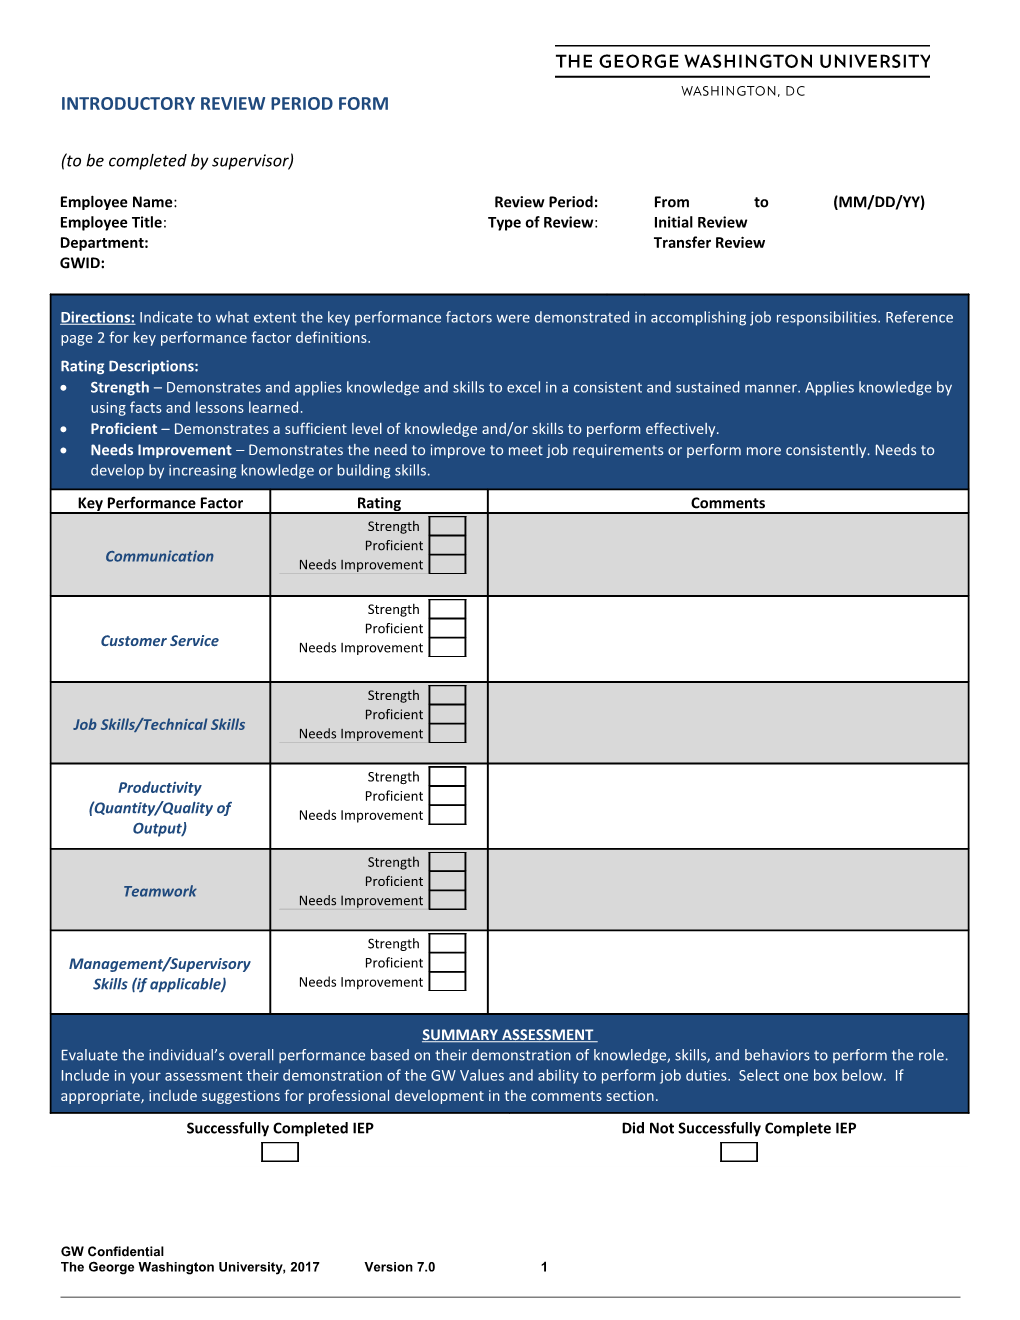 INTRODUCTORY REVIEW PERIOD FORM (To Be Completed by Supervisor)